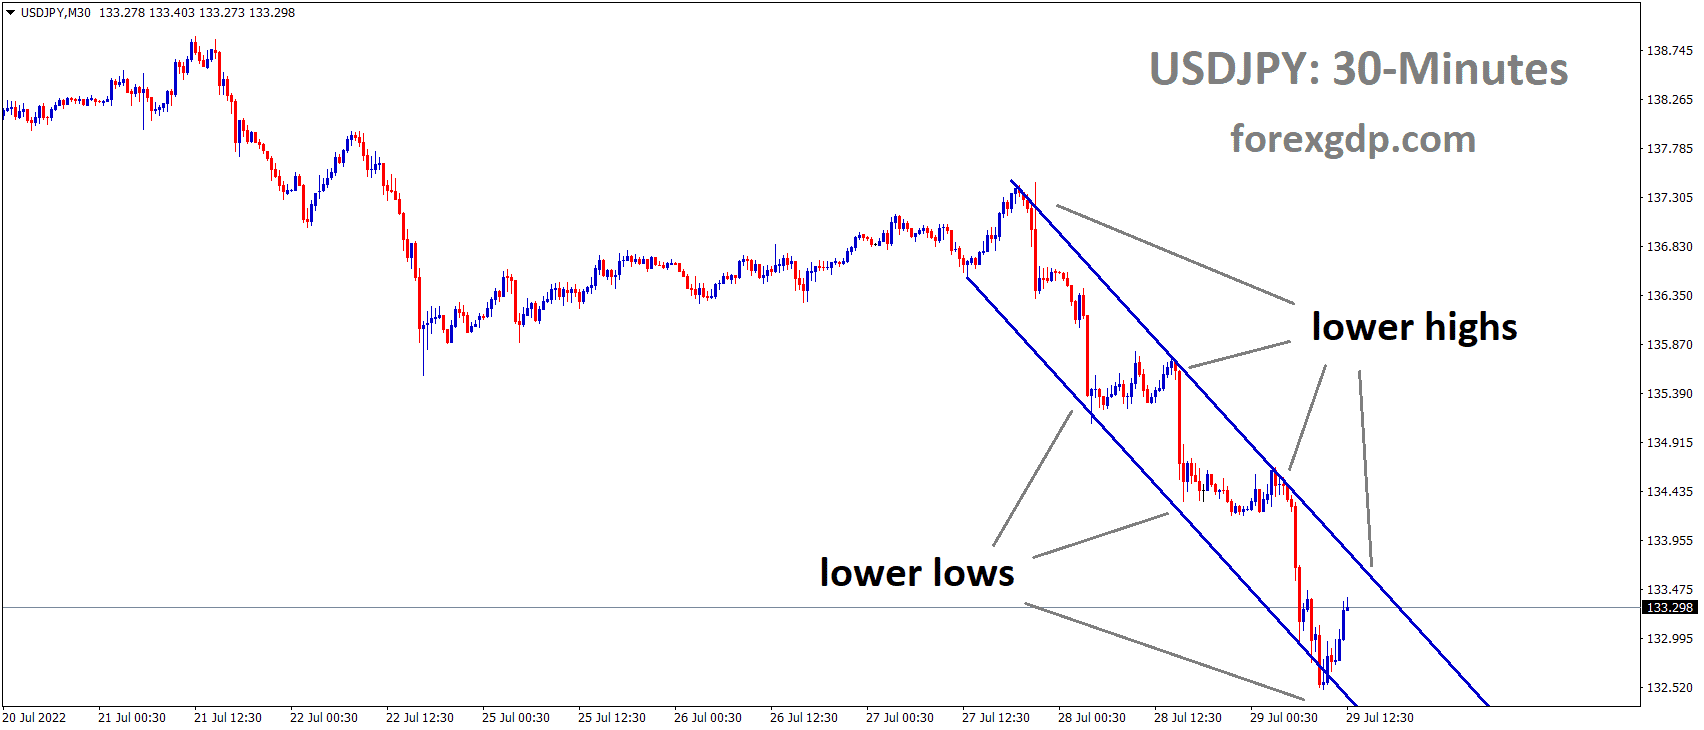 USDJPY is moving in the Descending channel and the Market has rebounded from the lower high area of the channel